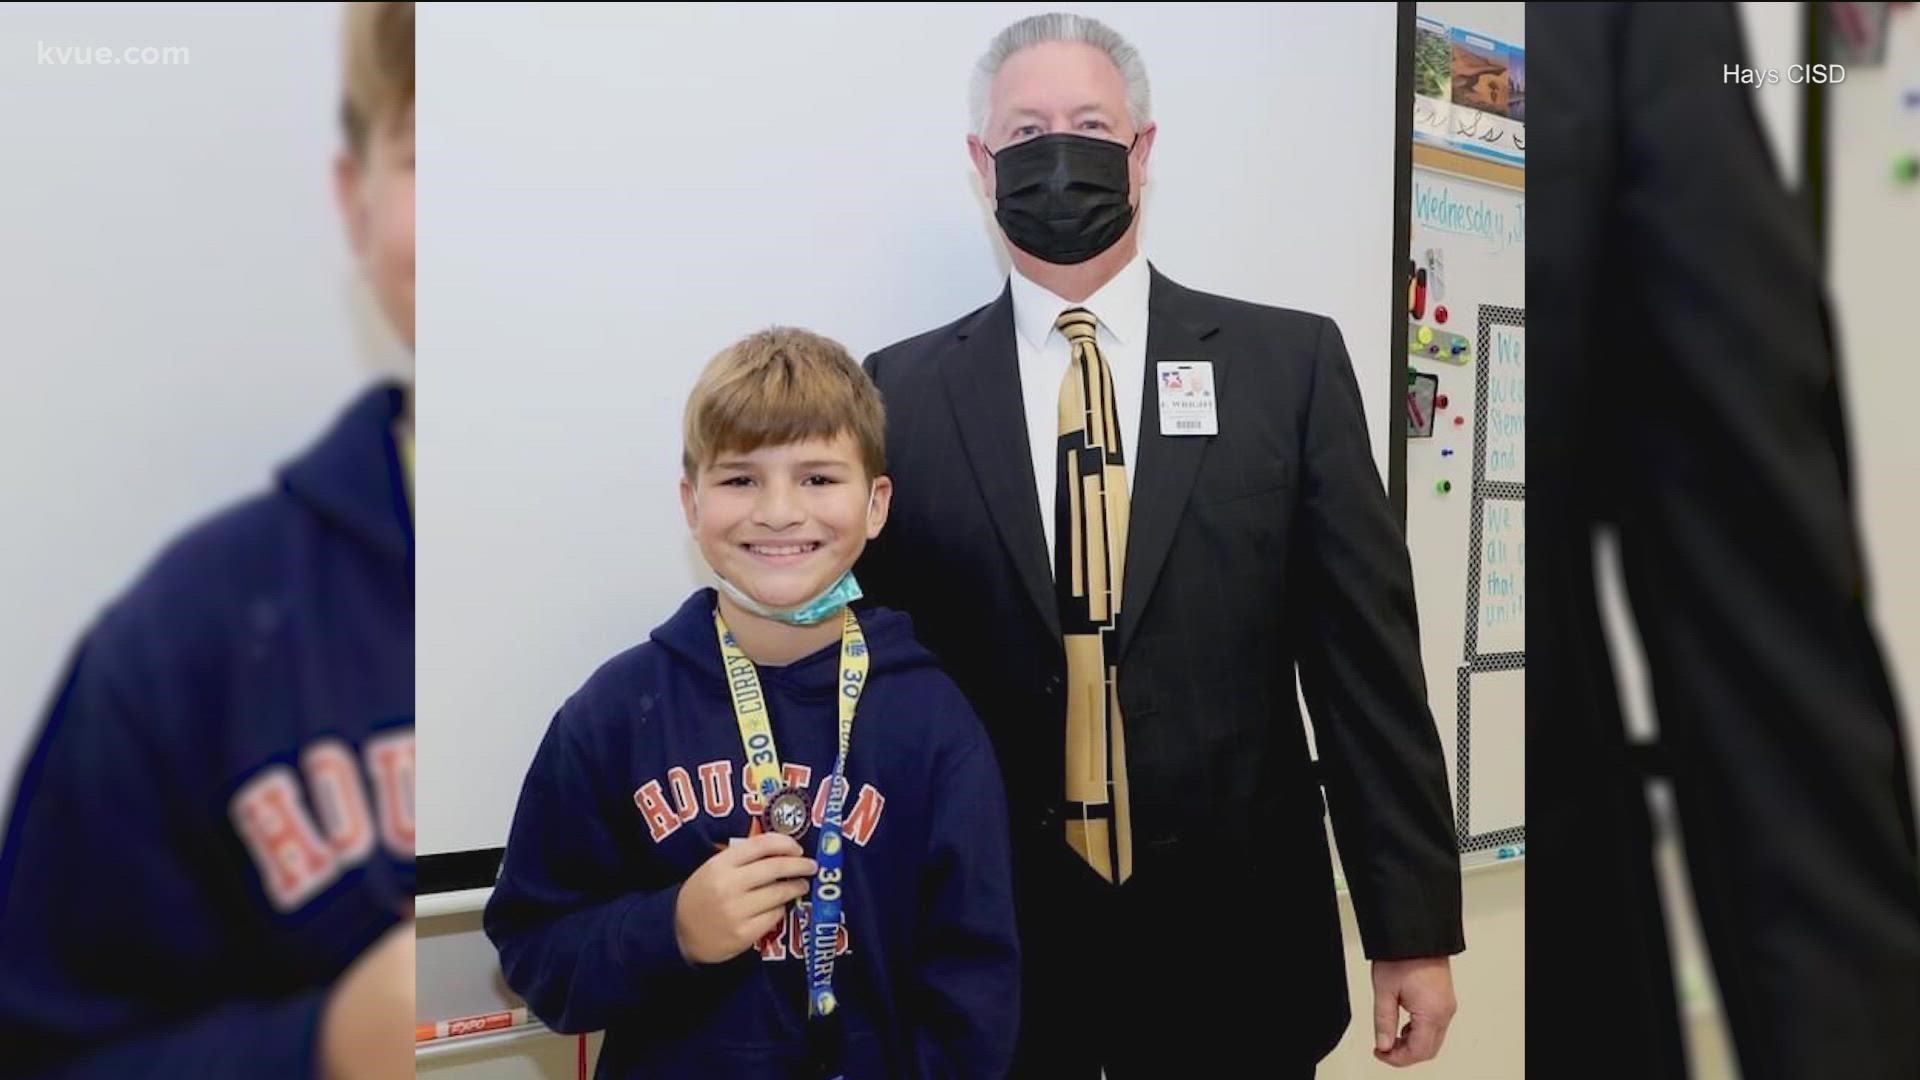 A Buda fourth-grader was honored for heroically saving his classmate's life.